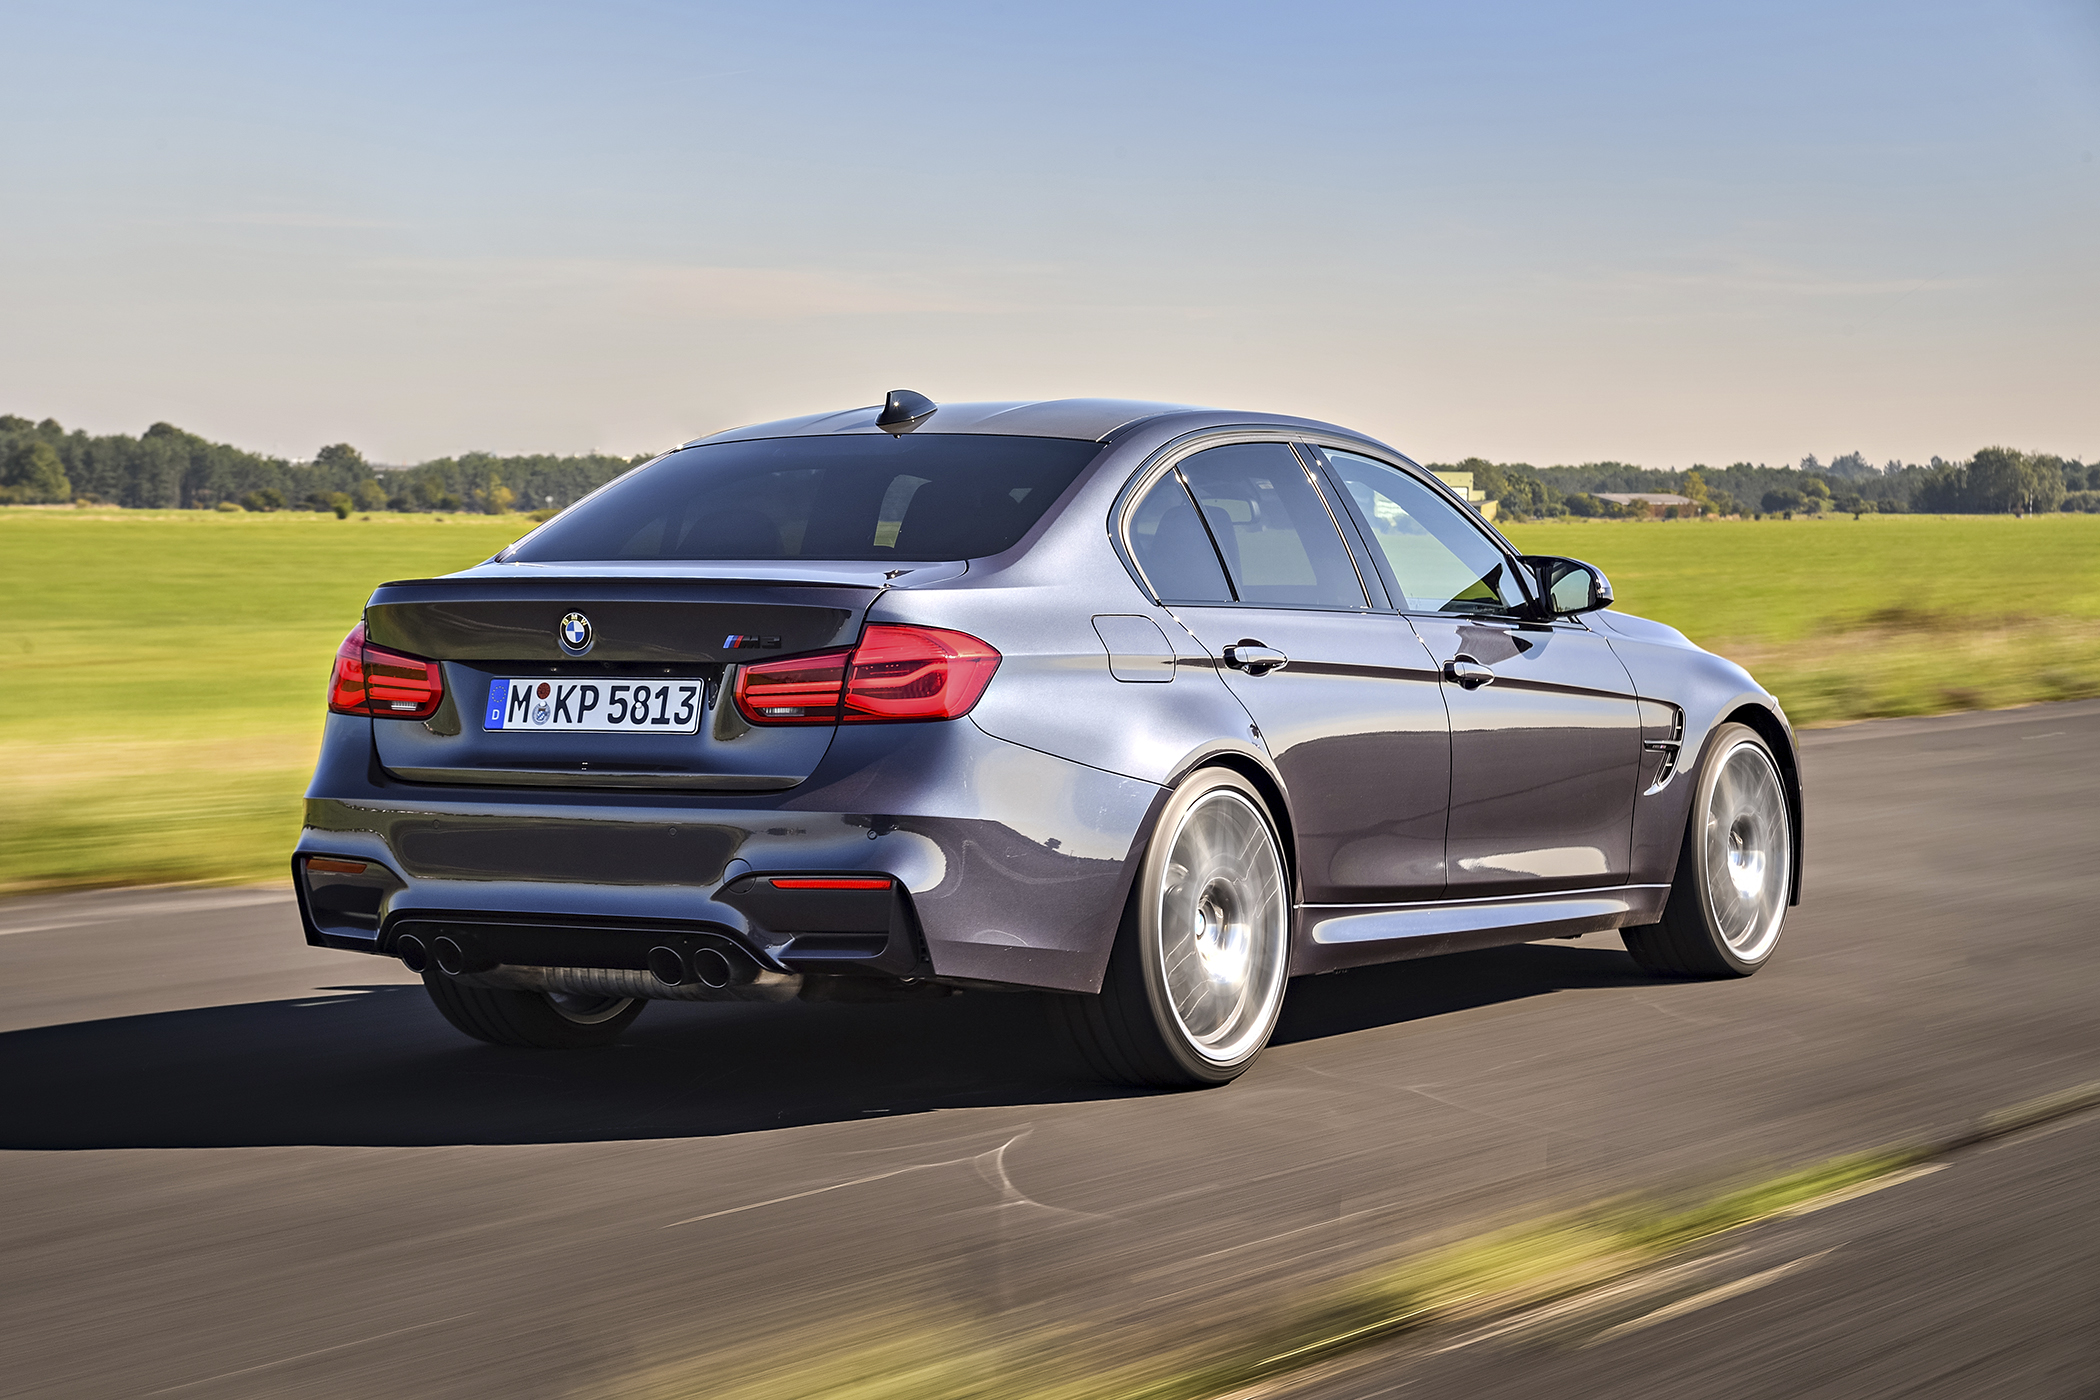 <strong>Best Coupe:</strong> In addition to being the most awards maker in the luxury wagon segment, the <a href="http://www.edmunds.com/bmw/m3/2015/" target="_blank">BMW 3 Series</a> also qualifies as the most frequently recognized luxury coupe when it comes to retained value. But be warned: the fuel costs, $10,830, come second only to the depreciation costs over five years (it loses 47% of its value in that time.) 